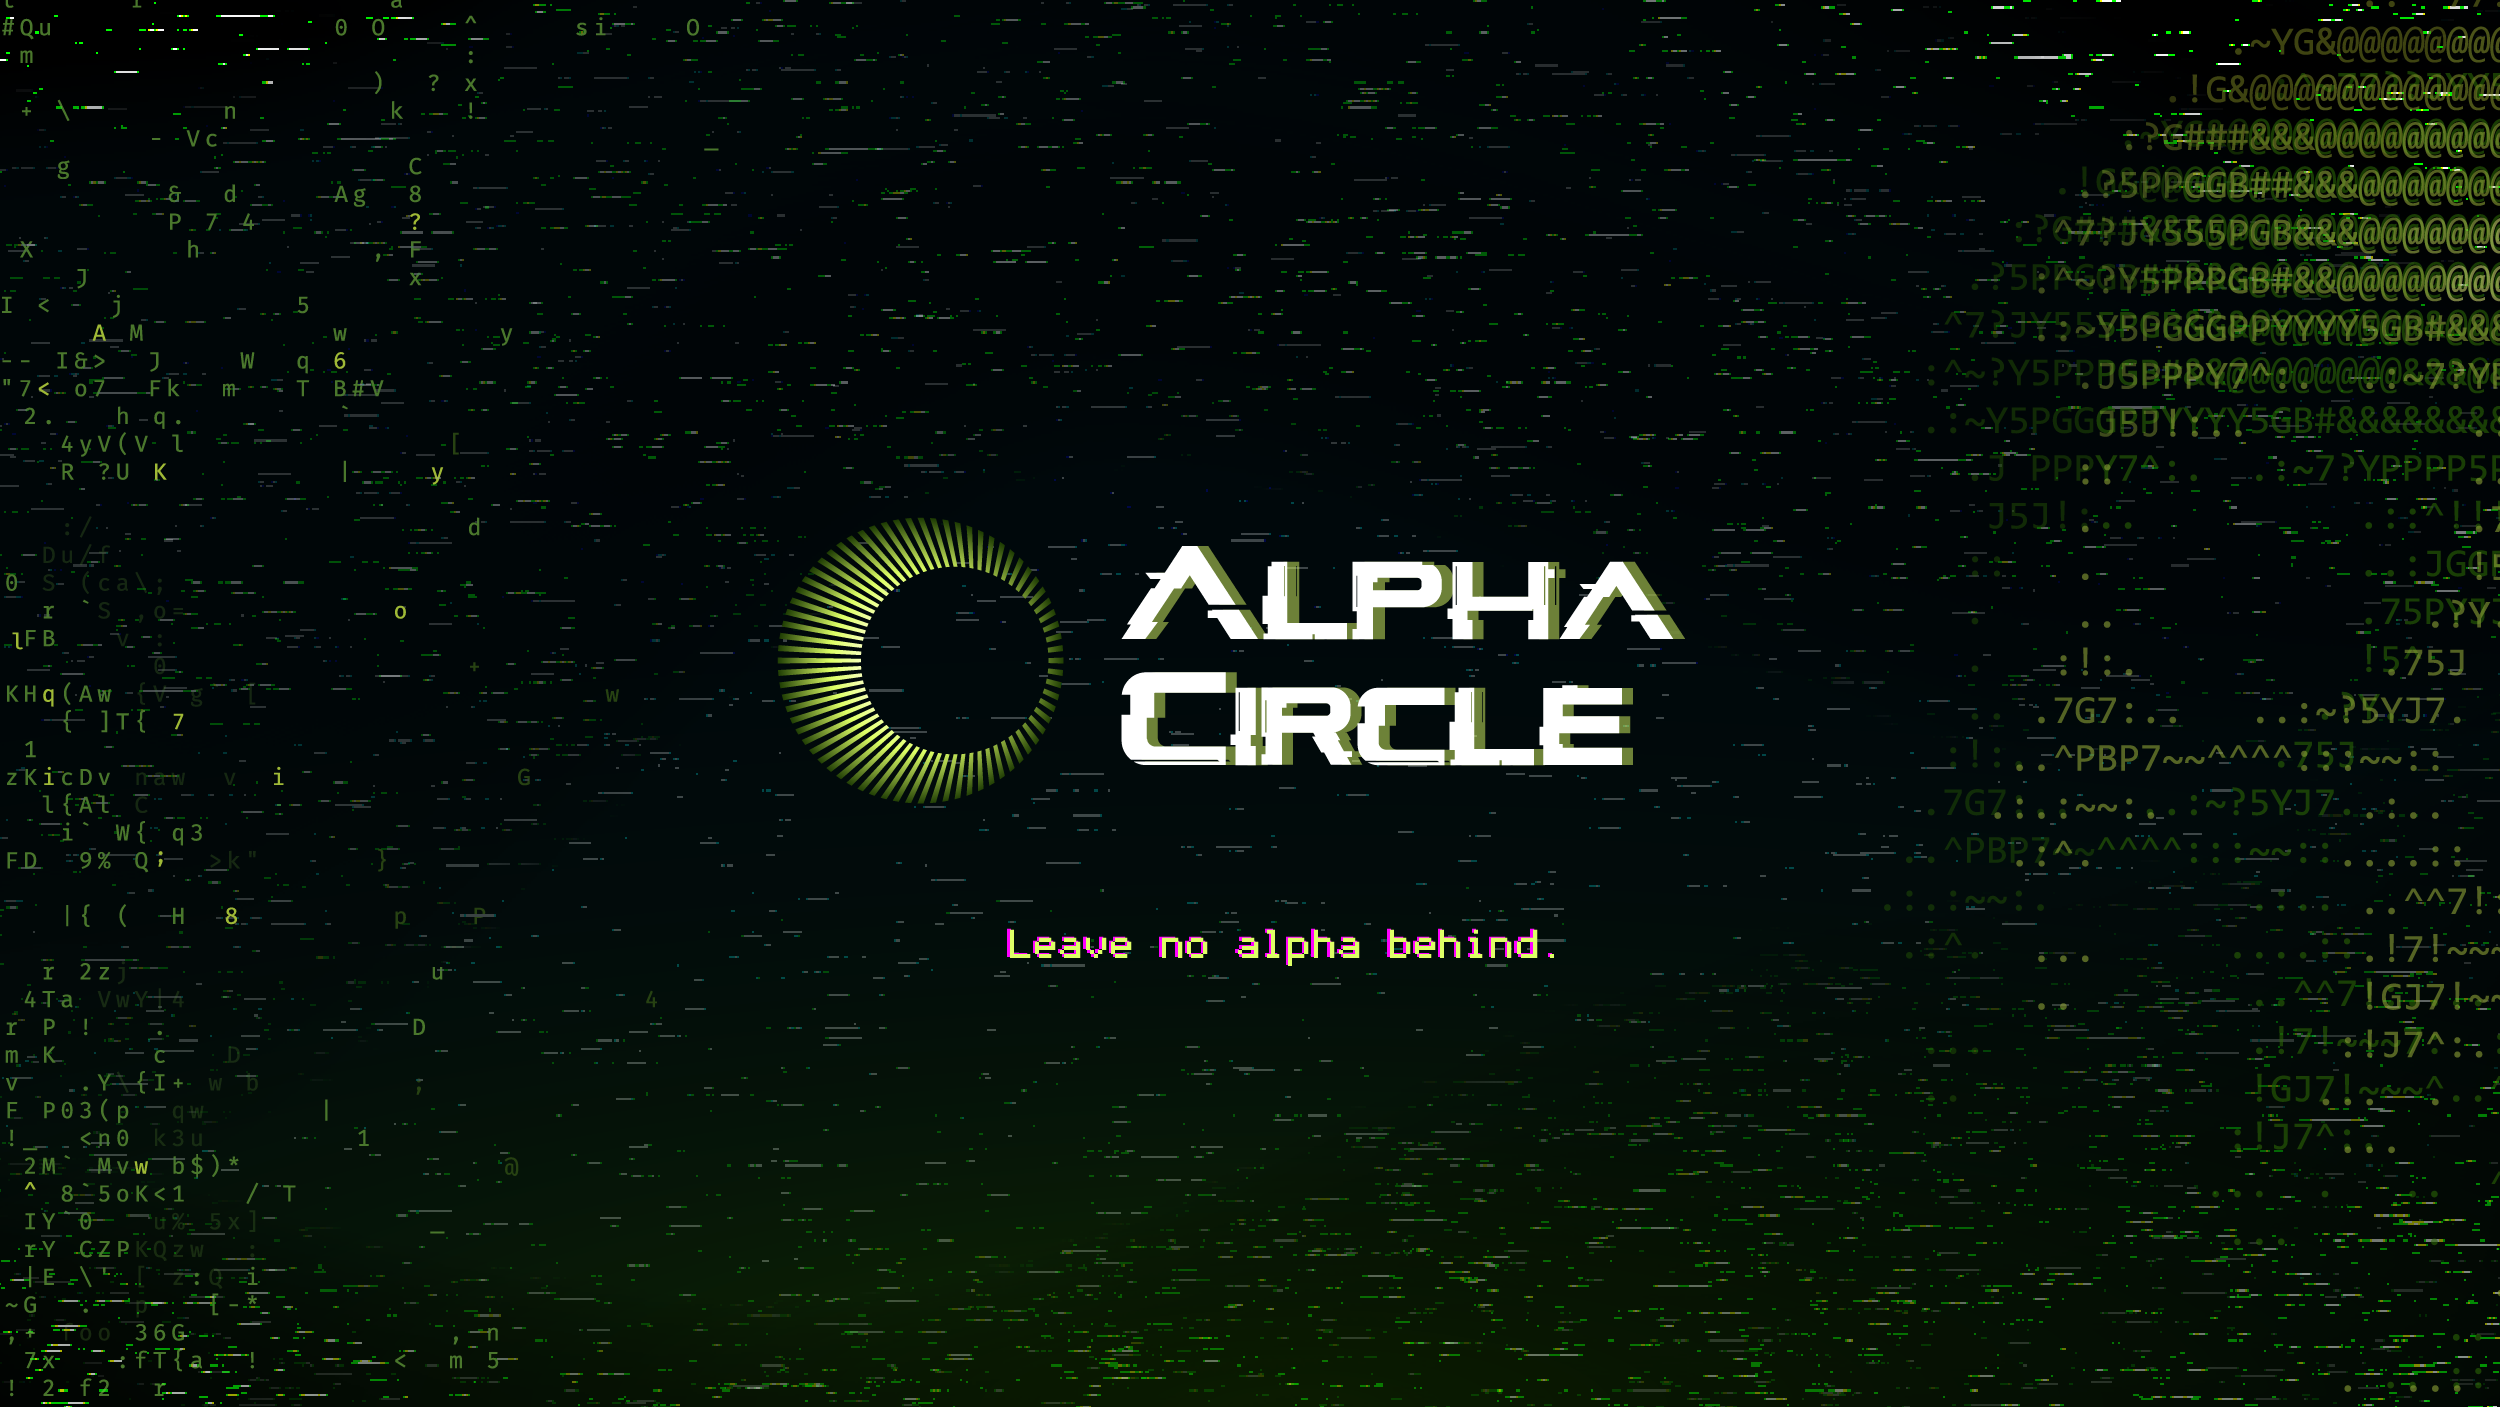 Alpha Circle solves information asymmetry in crypto trading